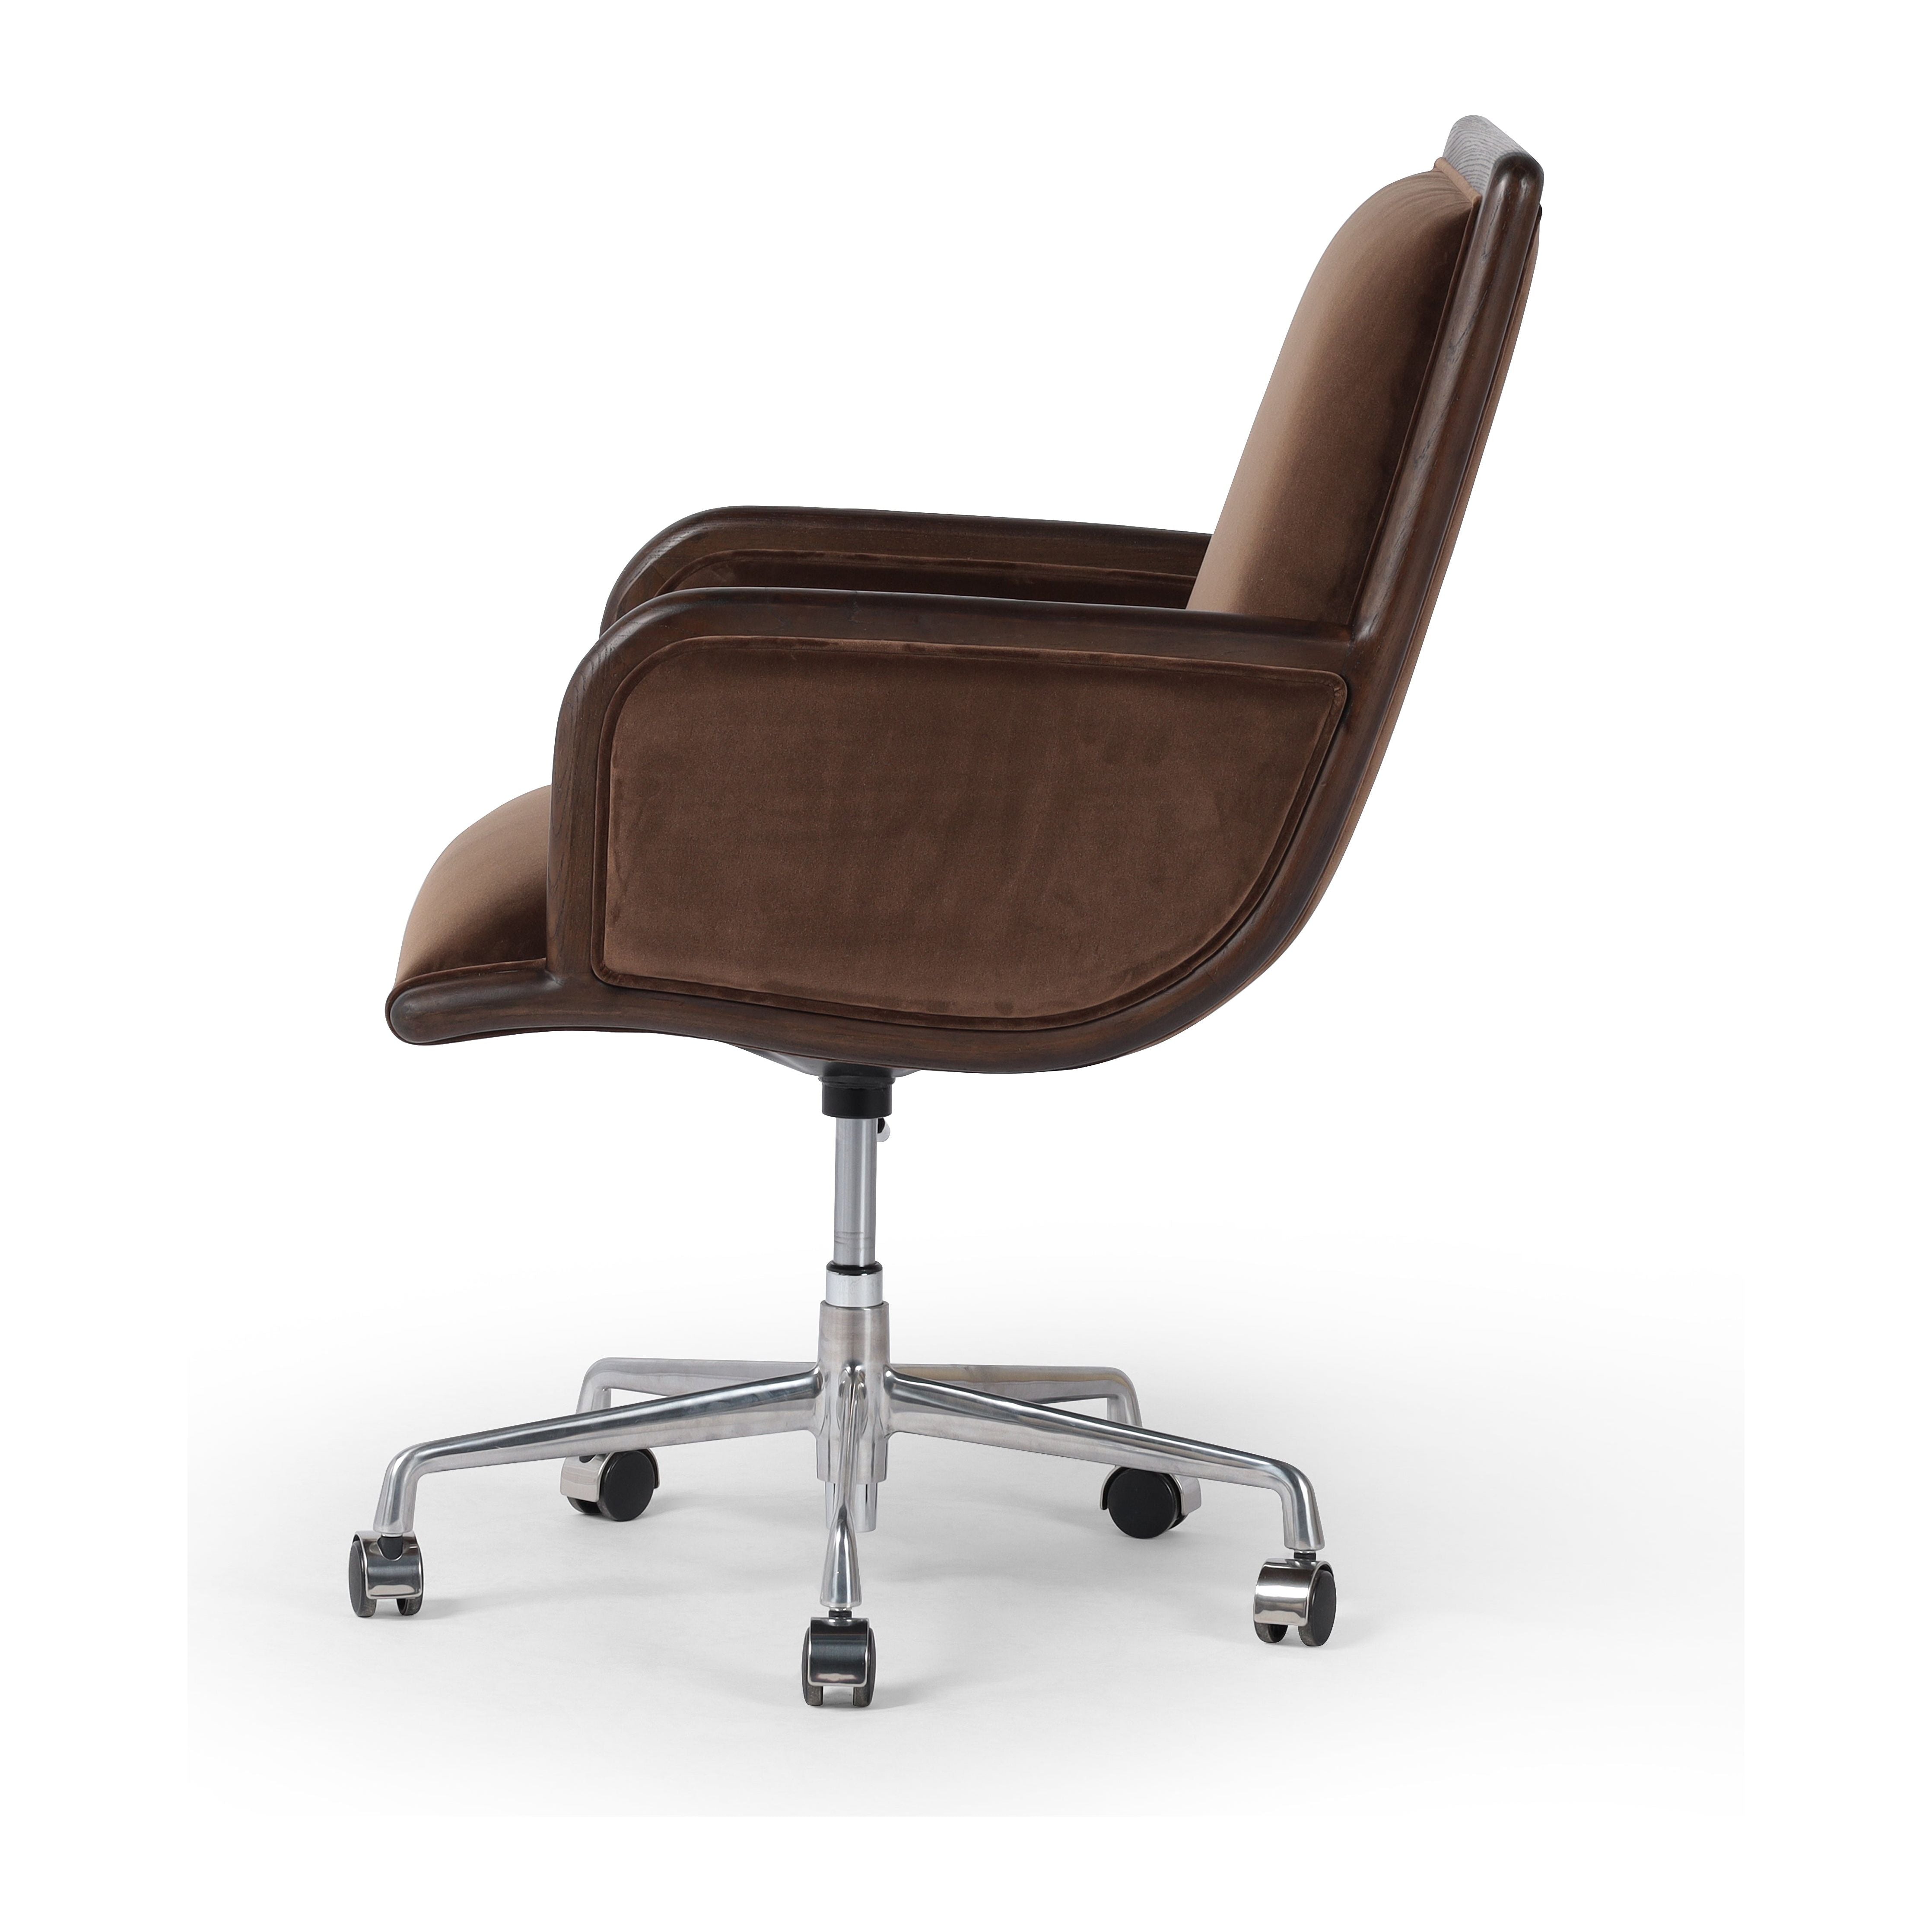 This comfort-driven take on the modern desk chair features velvety cocoa-colored upholstery, pared with a wooden frame. Casters and seat height adjustability for ease as you work. Amethyst Home provides interior design, new construction, custom furniture, and area rugs in the Alpharetta metro area.